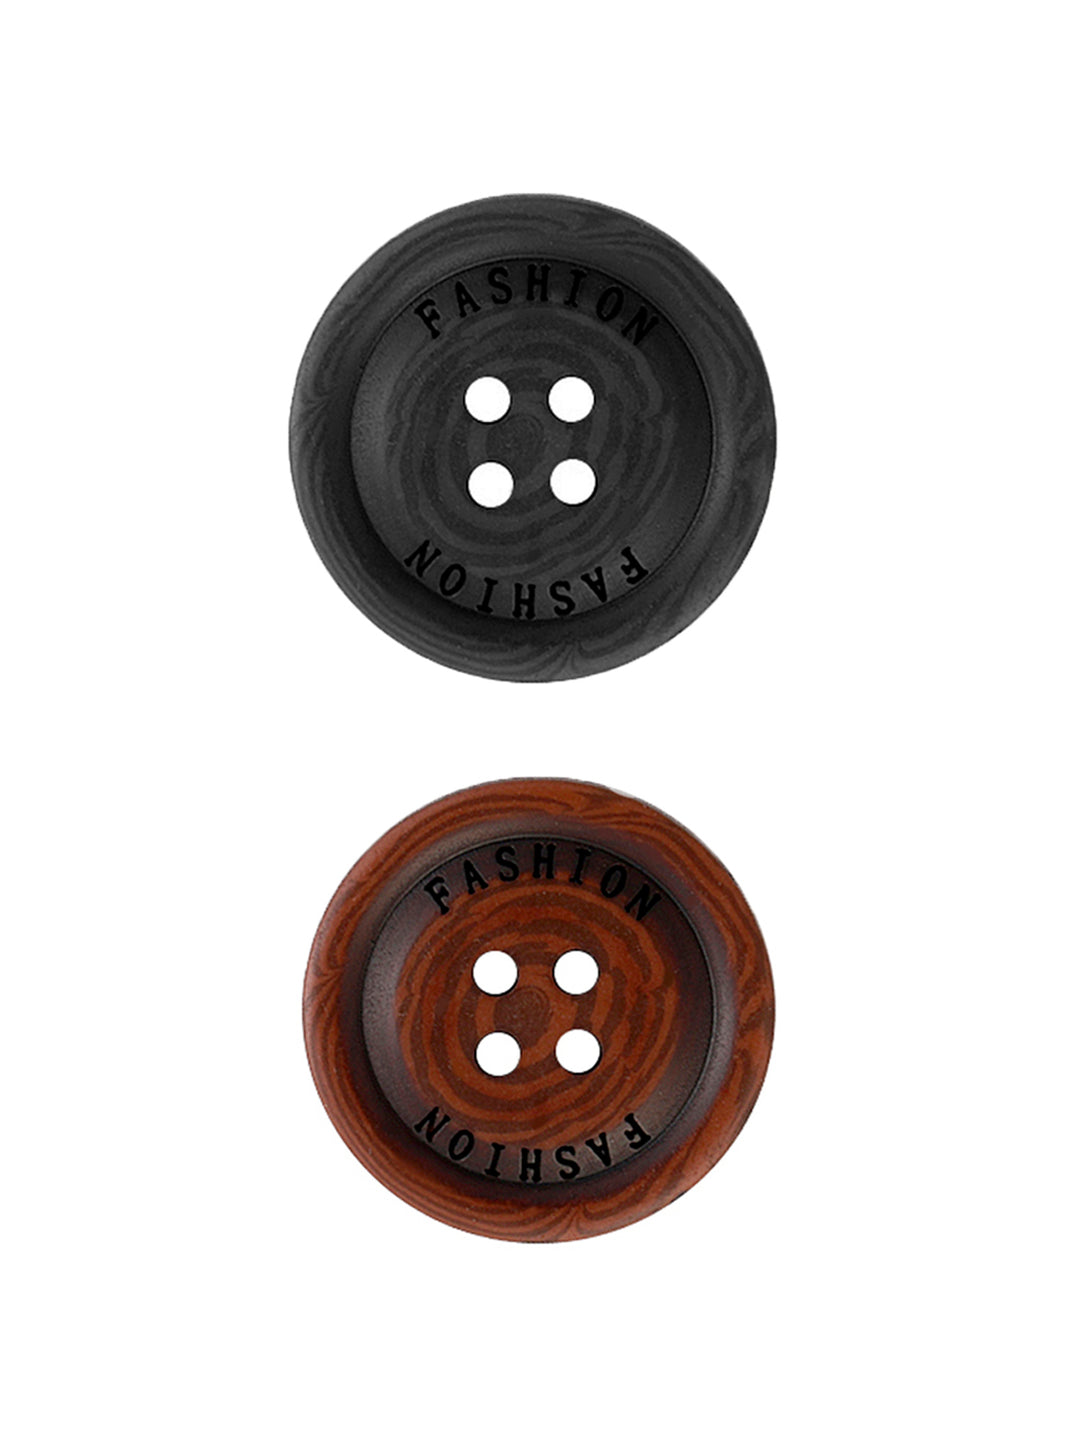 Wood-like Brown & Black Round Shape Coat Buttons